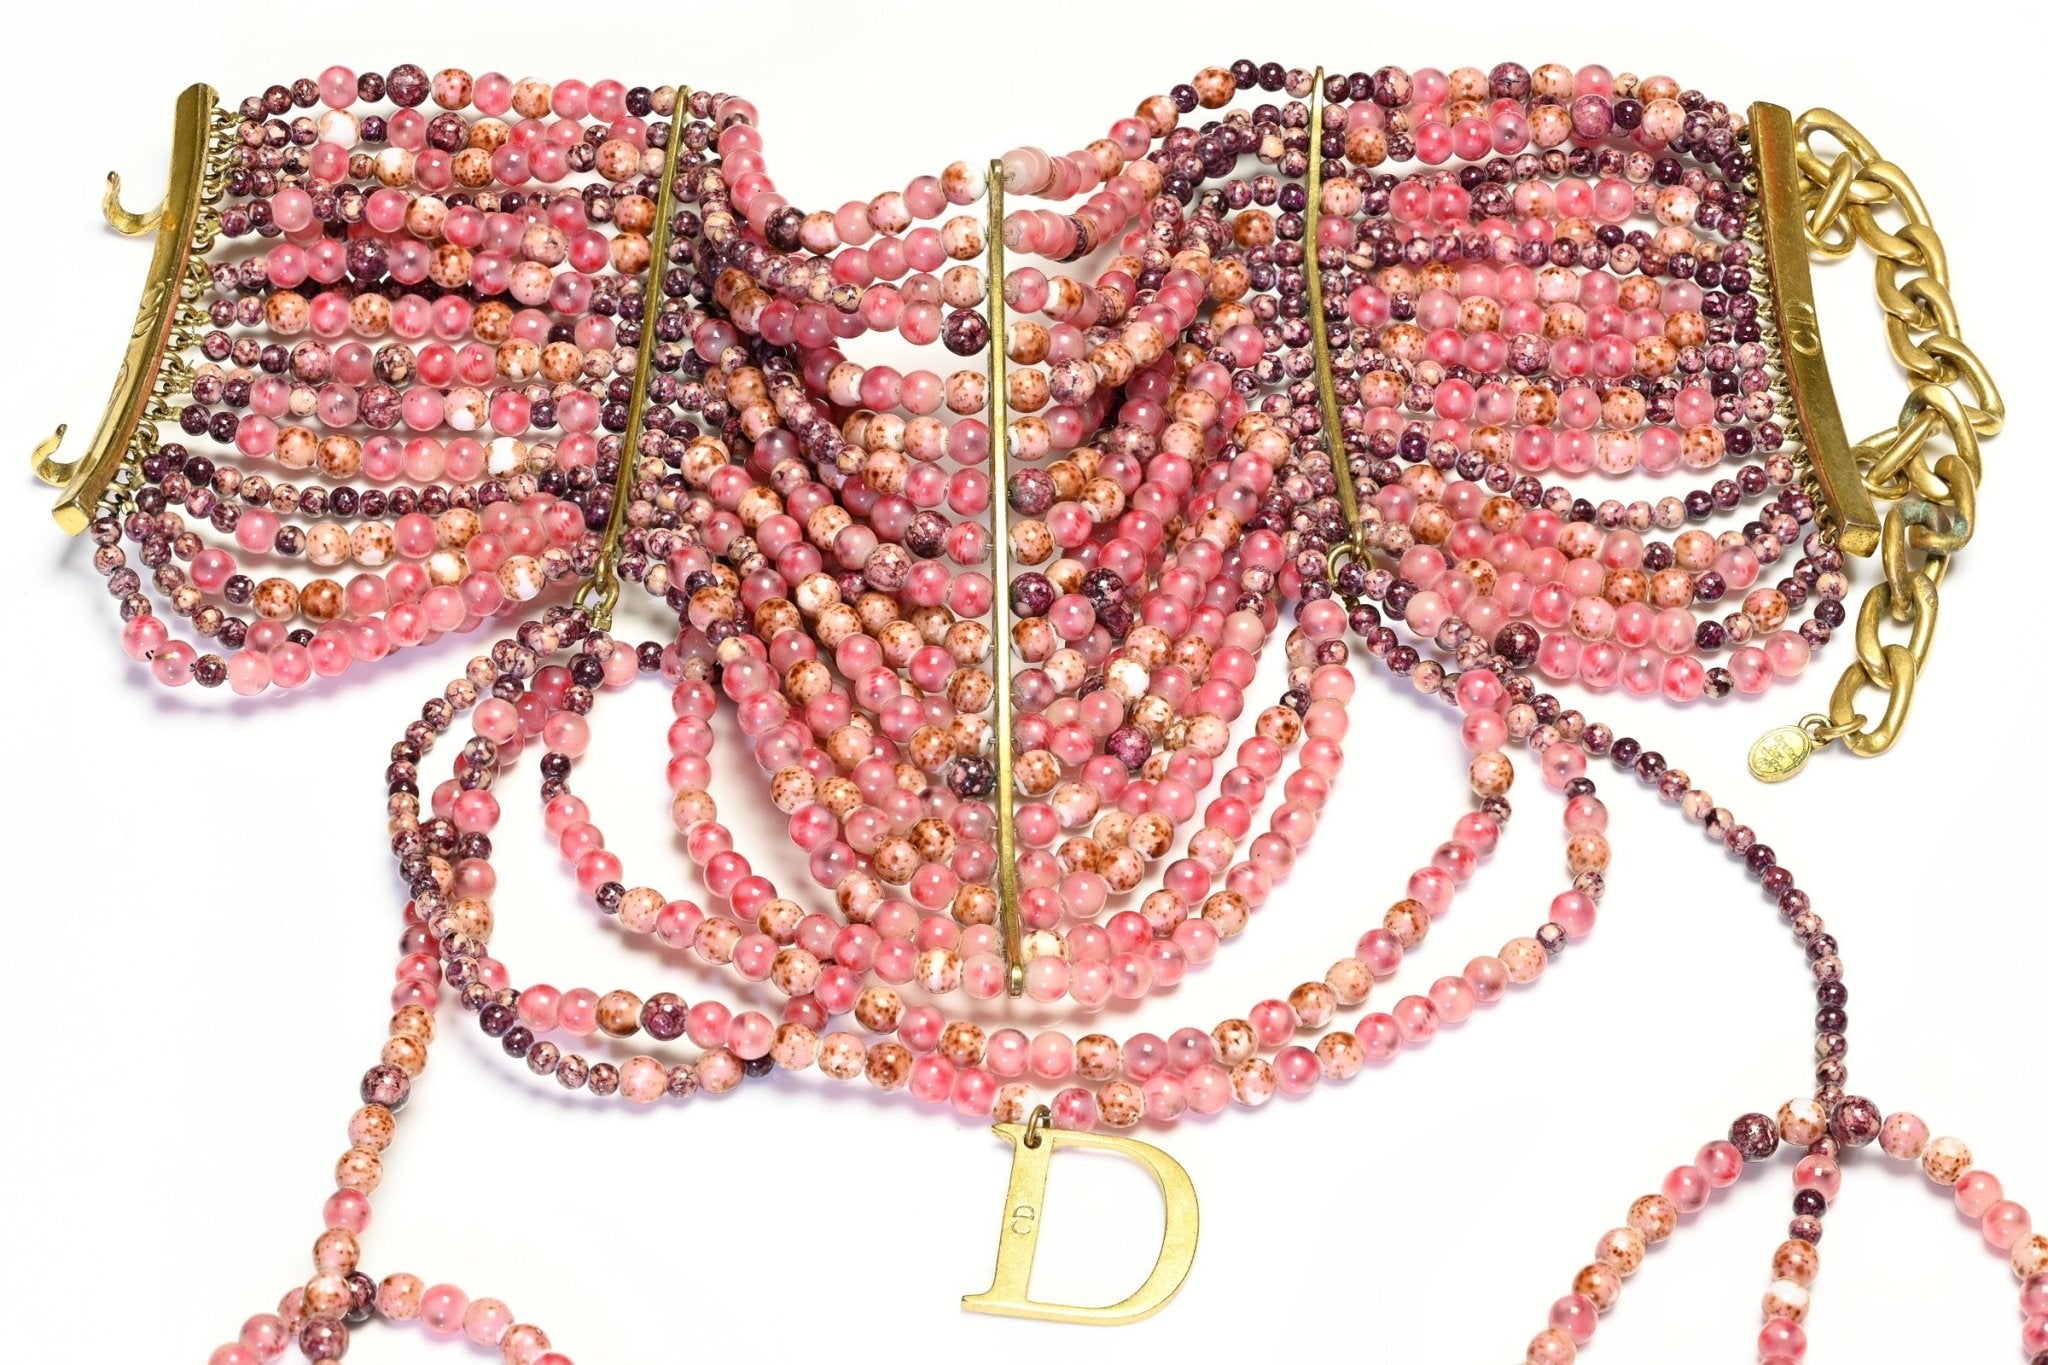 Christian Dior Couture 1998 Galliano Pink Glass Beads Masai Choker Necklace - DSF Antique Jewelry